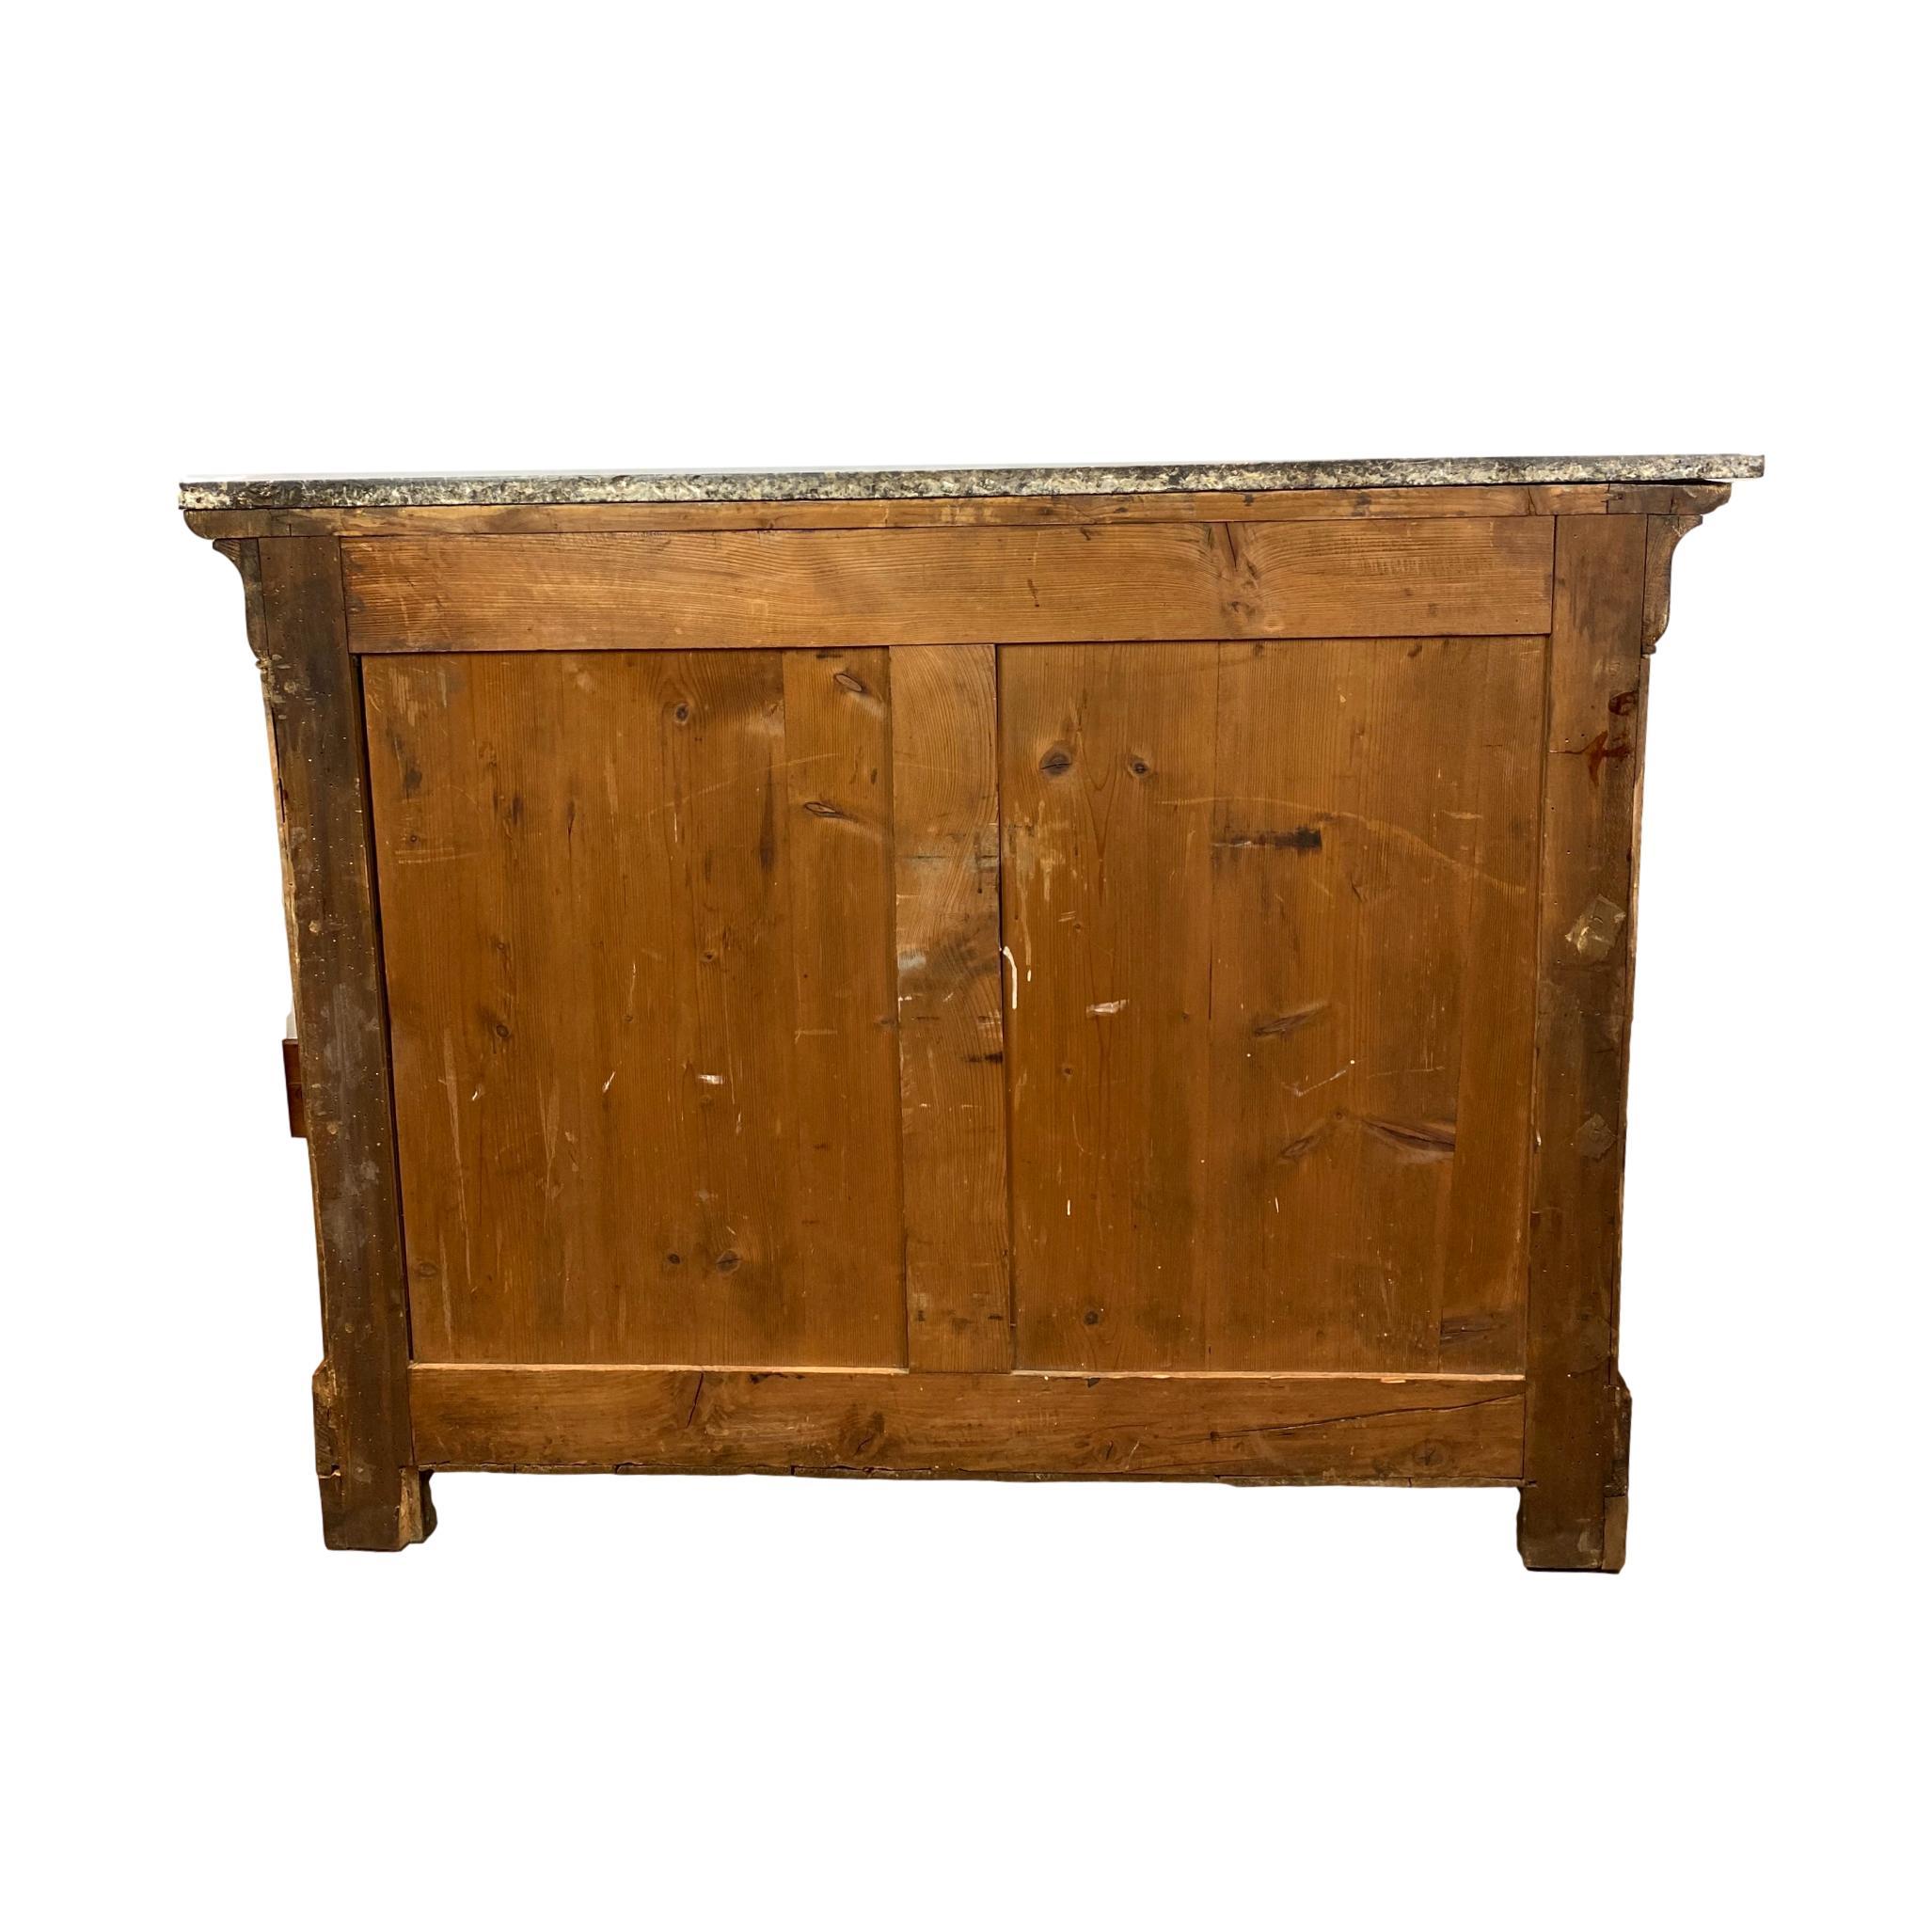 19th Century Louis Philippe Marble-Top Commode in Figured Walnut, French, circa 1840